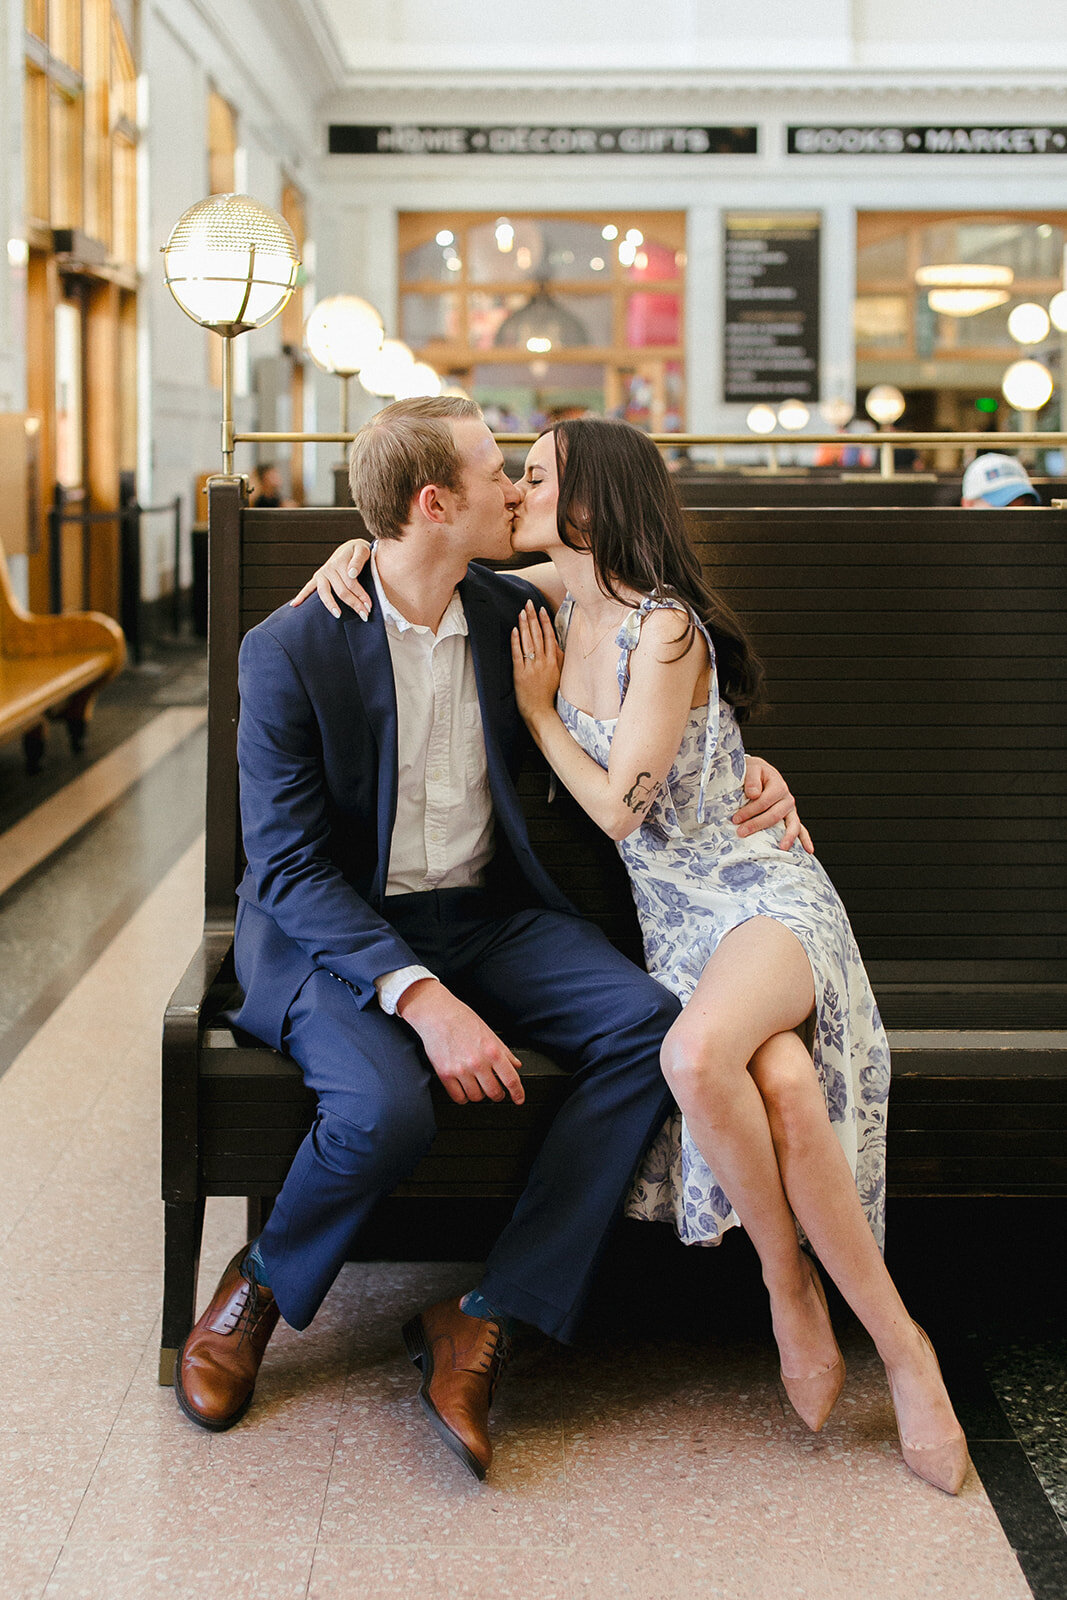 Couple kiss at Union Station in Denver, Colorado. Bride wears a floral Reformation dress and groom wears a blue suit.